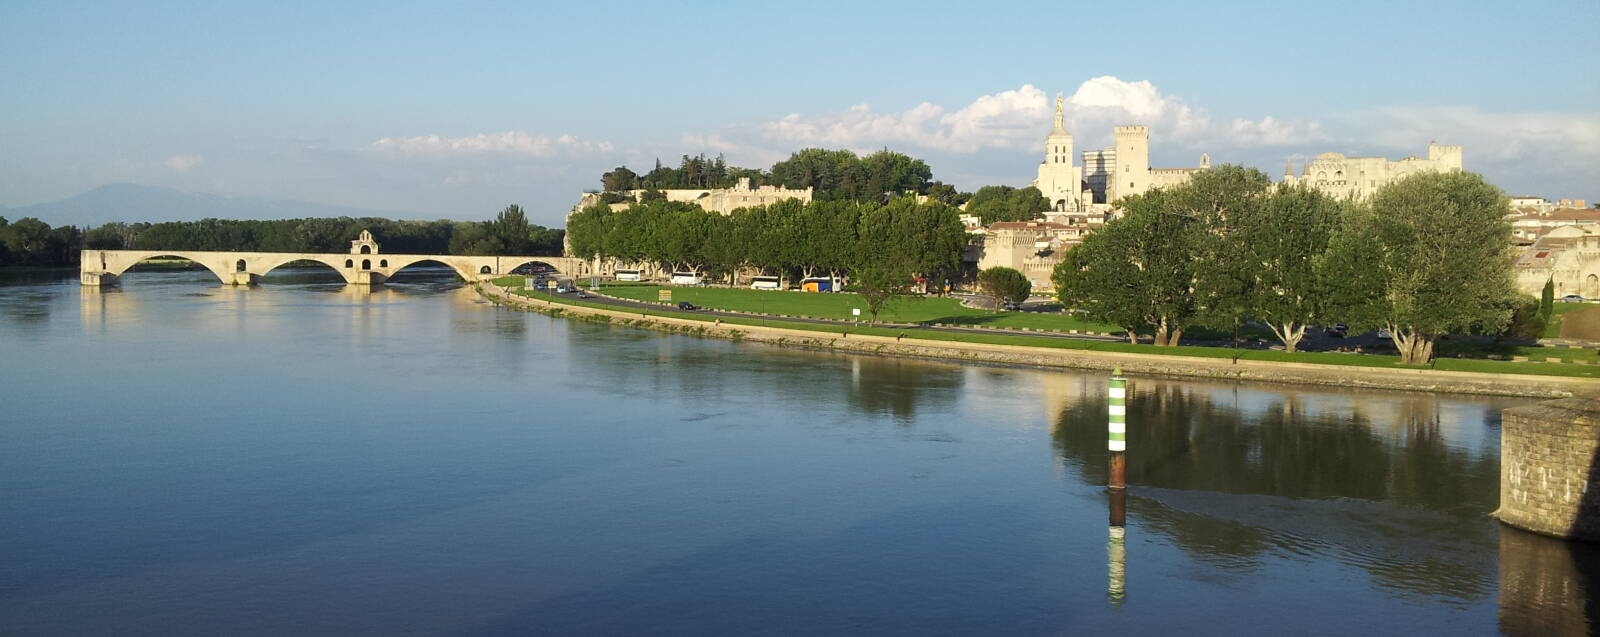 The Rhône river at Avignon, the Pont d'Avignon, the Palais des Papes or Palace of the Popes, the city walls of Avignon, and Mont Ventoux in the distance.